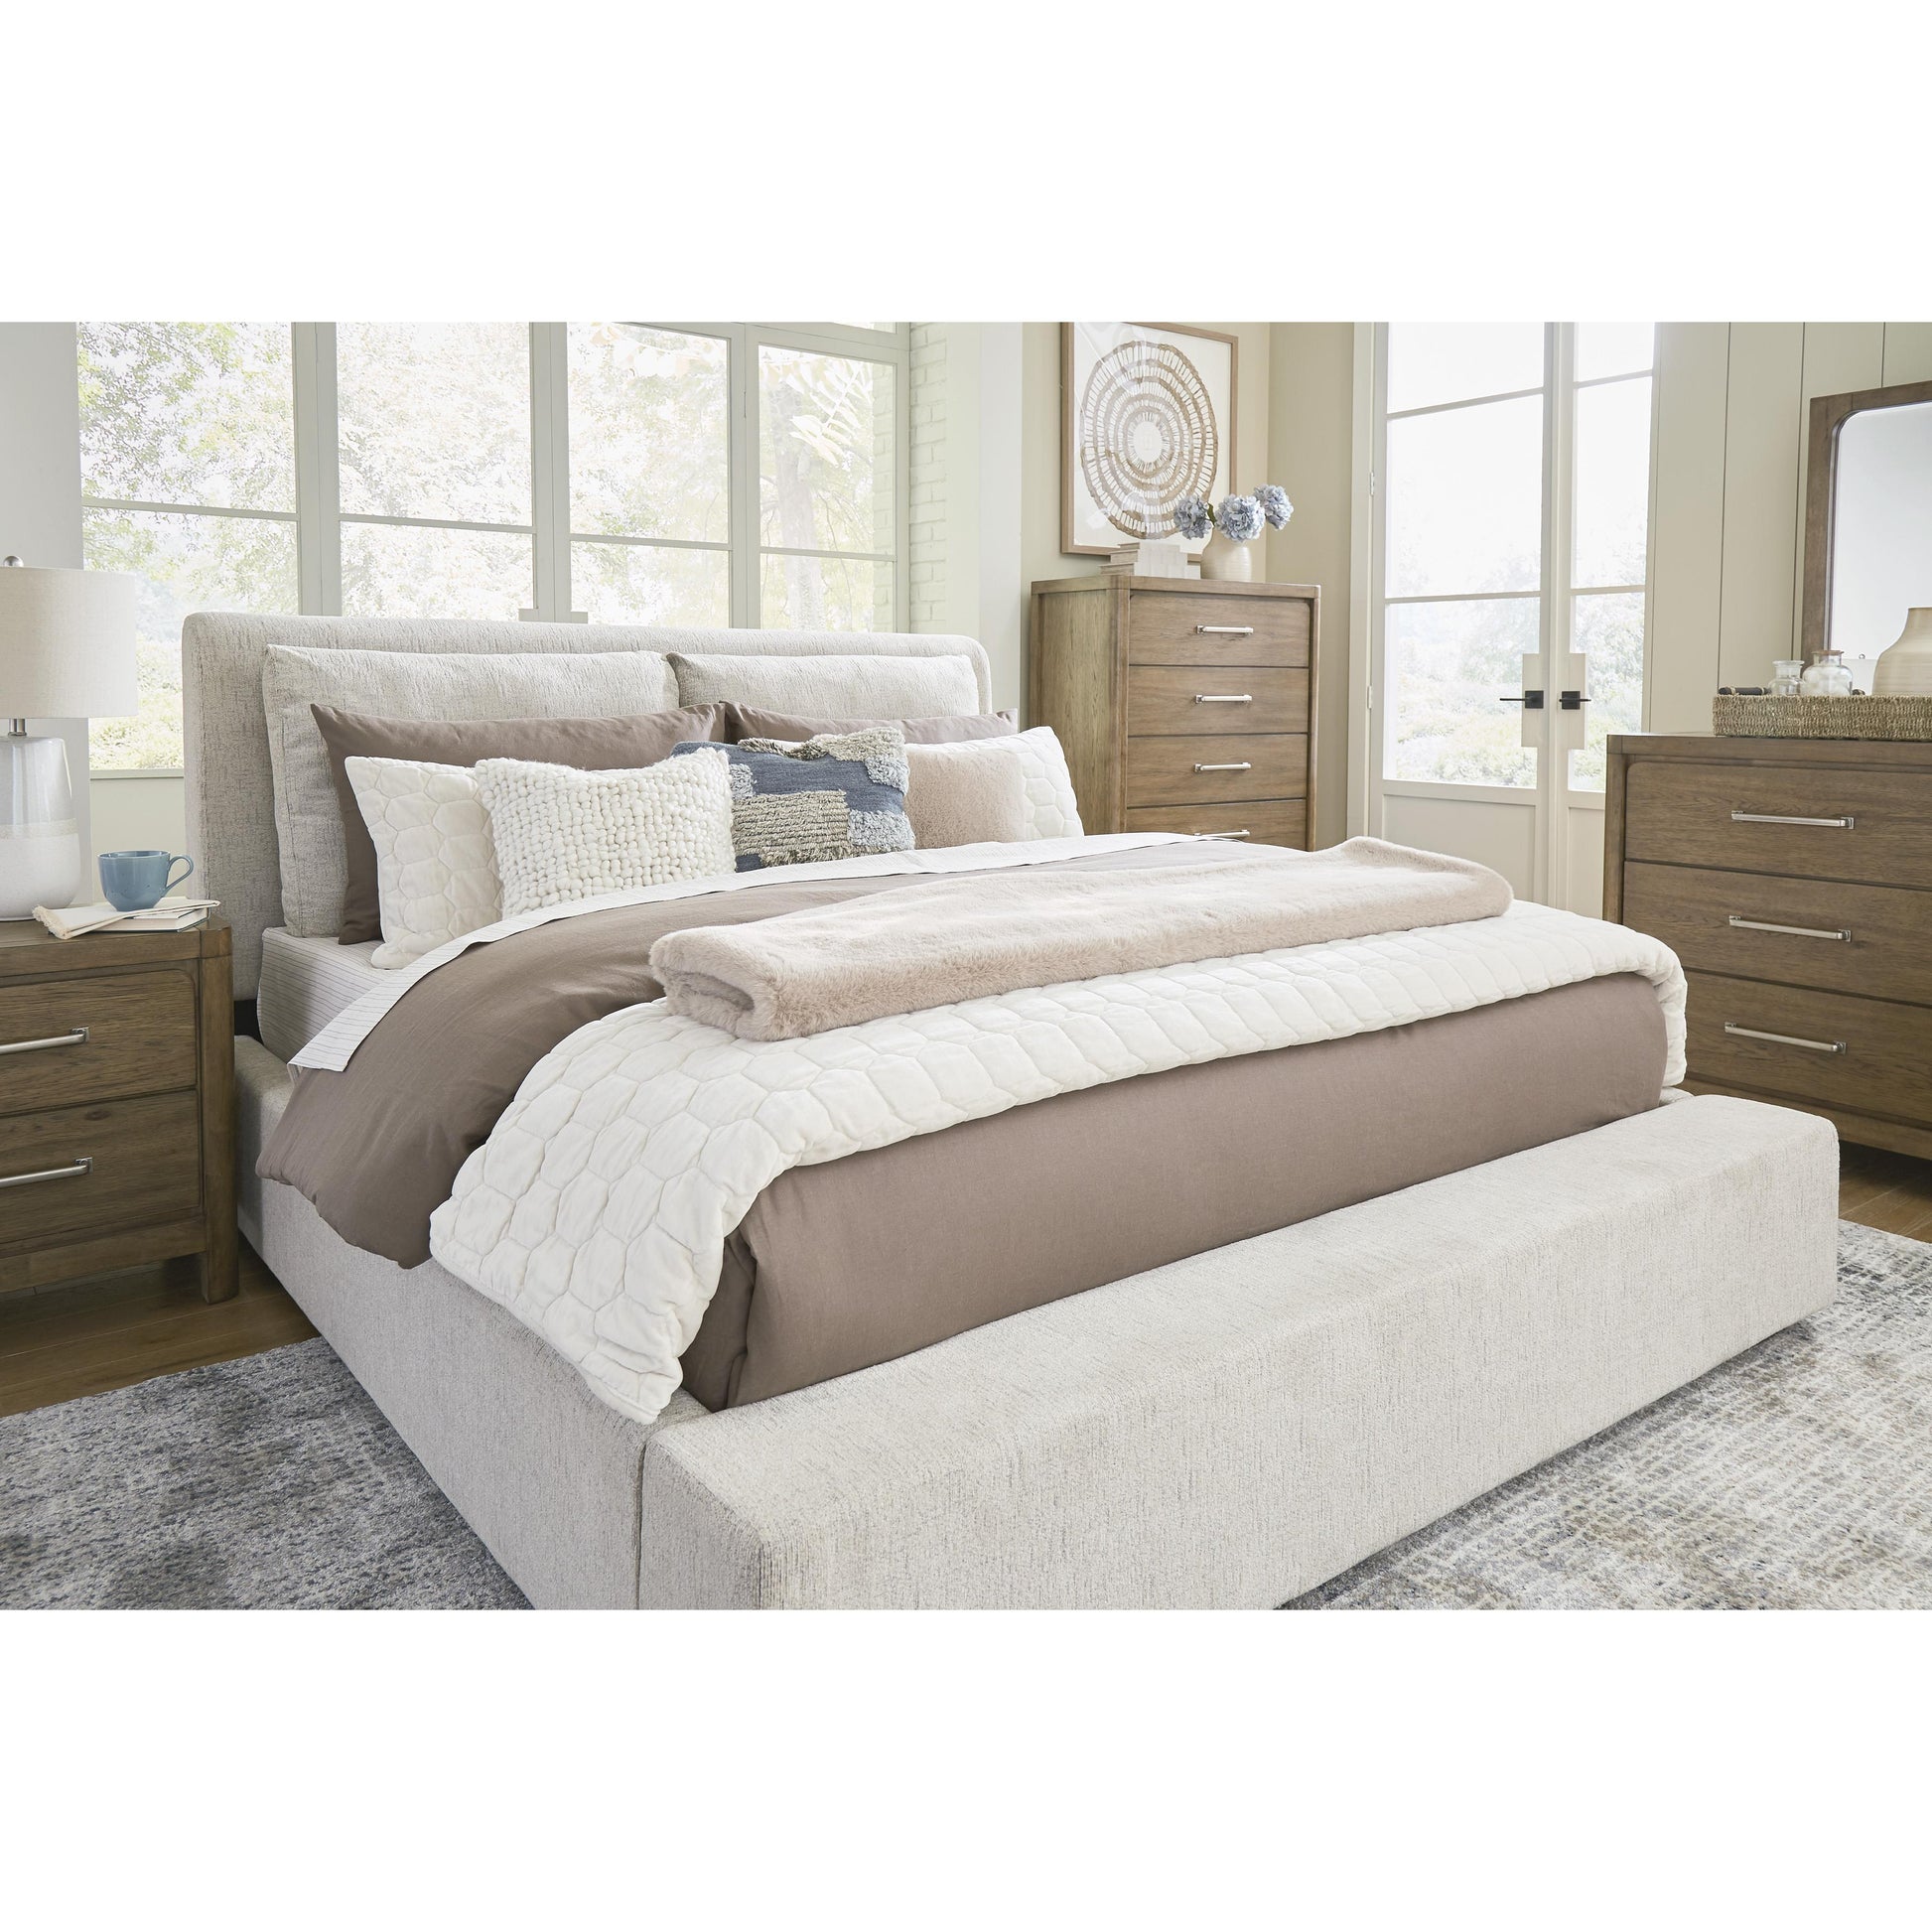 Signature Design by Ashley Cabalynn King Upholstered Bed B974-78/B974-76 IMAGE 8